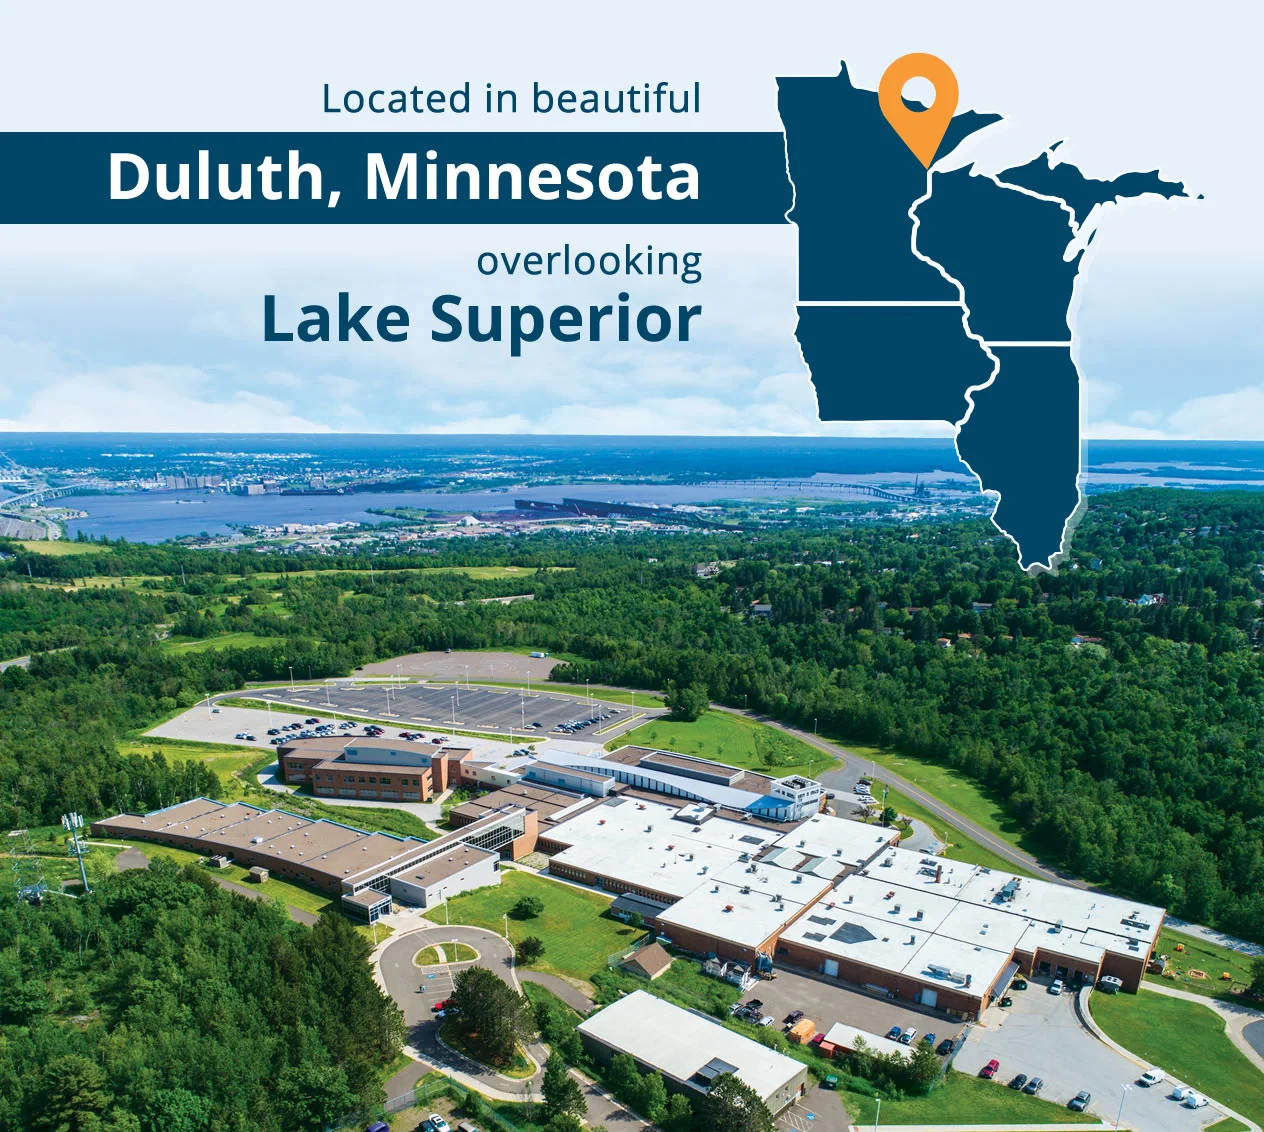 L.S.C. is located in beautiful Duluth, Minnesota, overlooking Lake Superior